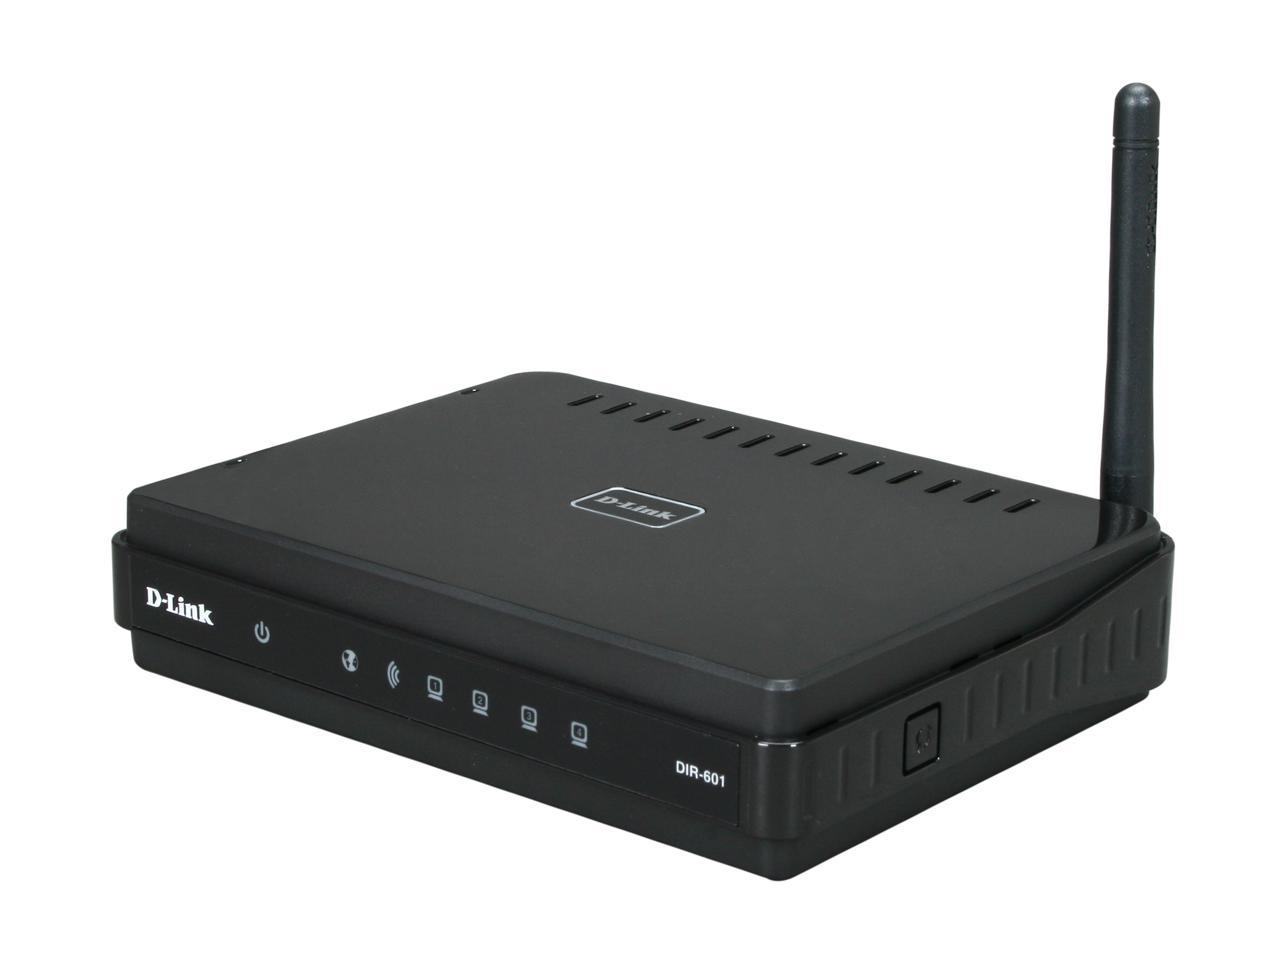 D-Link D-Link Wireless N 150 Home Router 